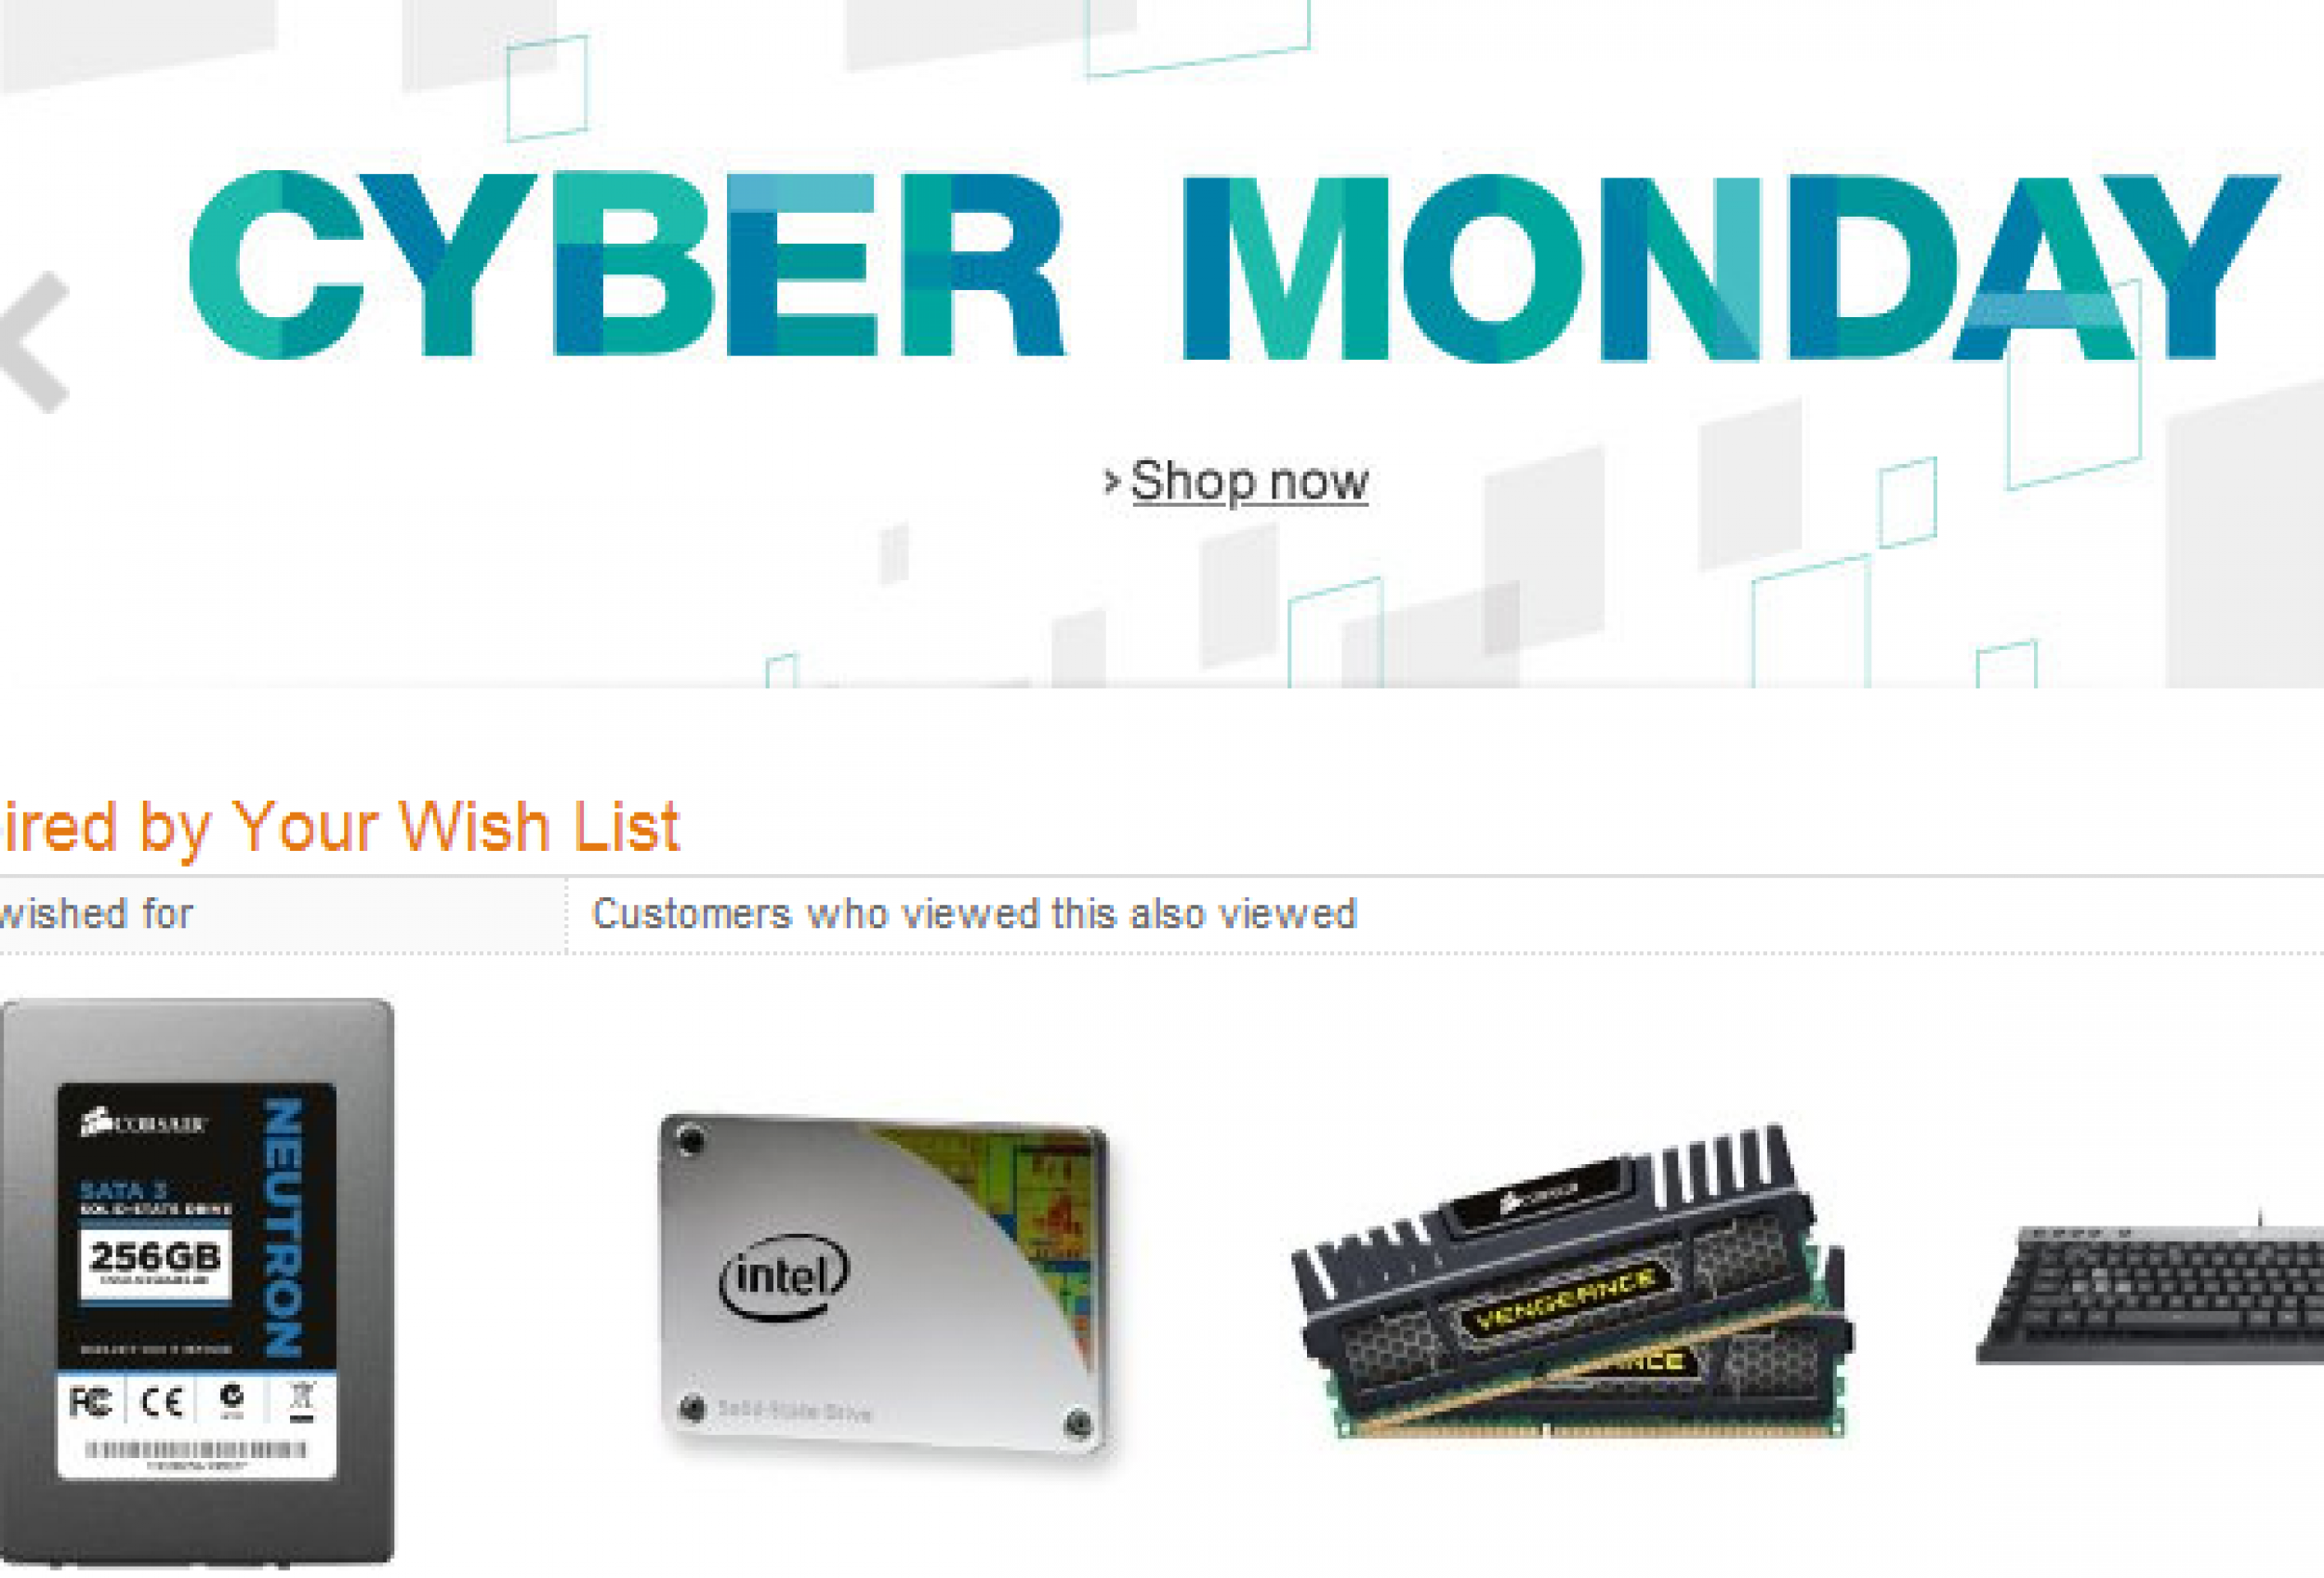 Cyber Monday Hard Drive Deals The Best HDD & SSD Discounts From Amazon